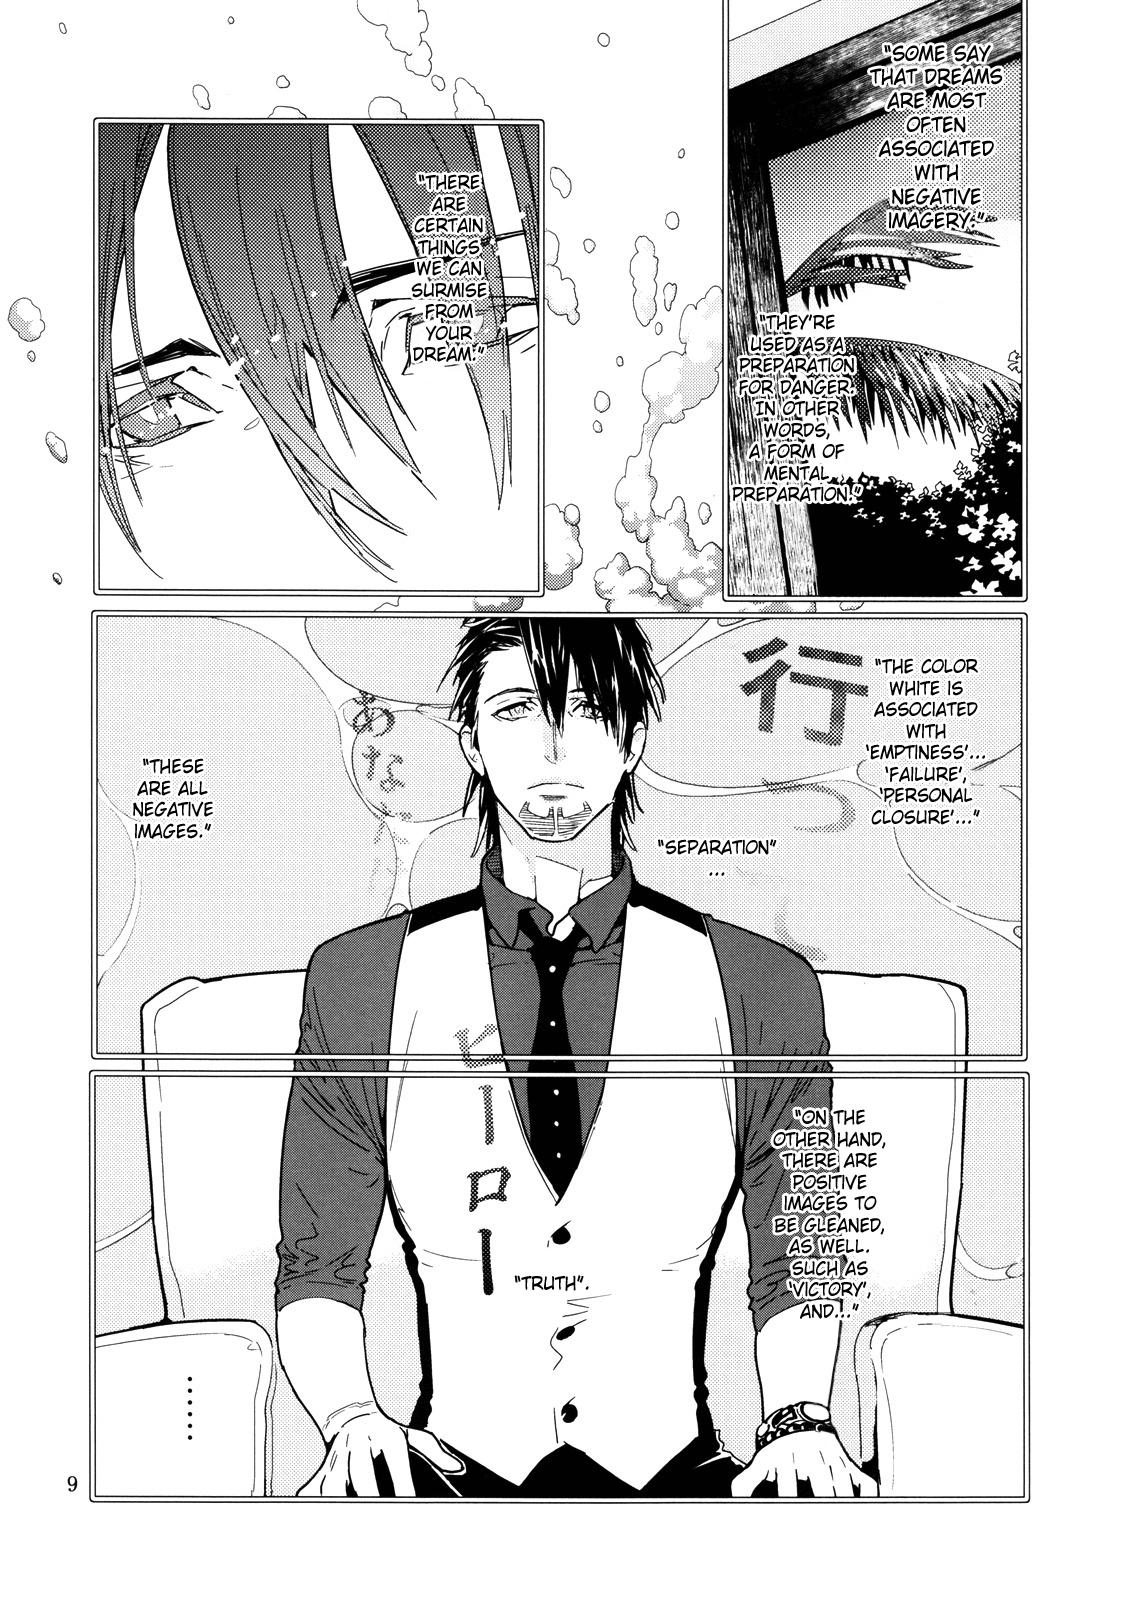 American Candy Man 4 - Tiger and bunny Cheating Wife - Page 8